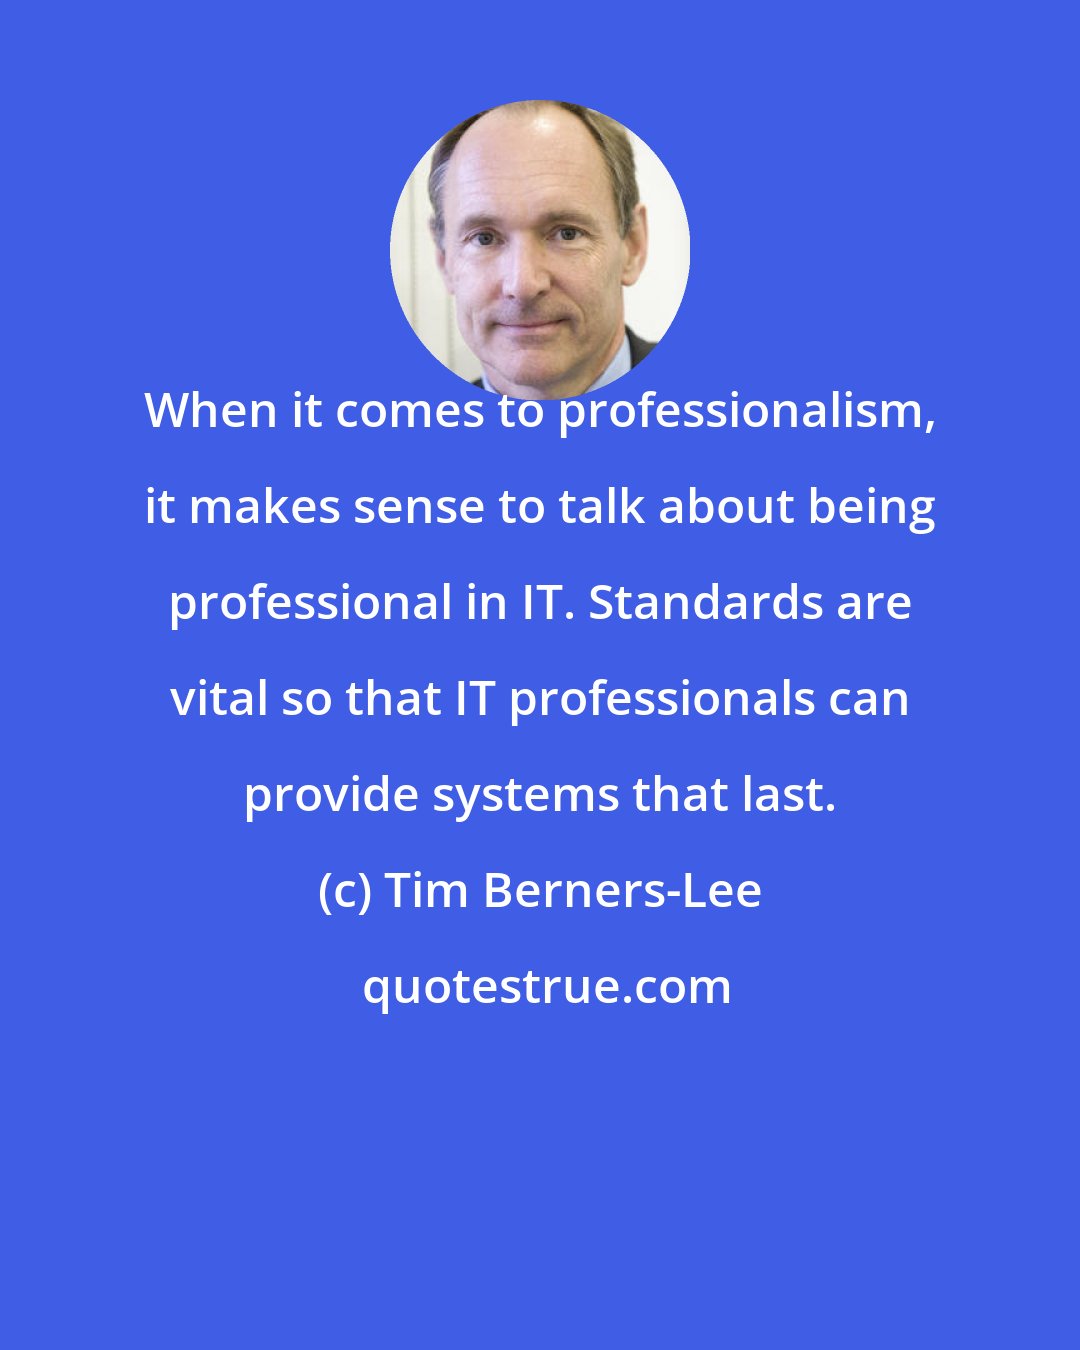 Tim Berners-Lee: When it comes to professionalism, it makes sense to talk about being professional in IT. Standards are vital so that IT professionals can provide systems that last.